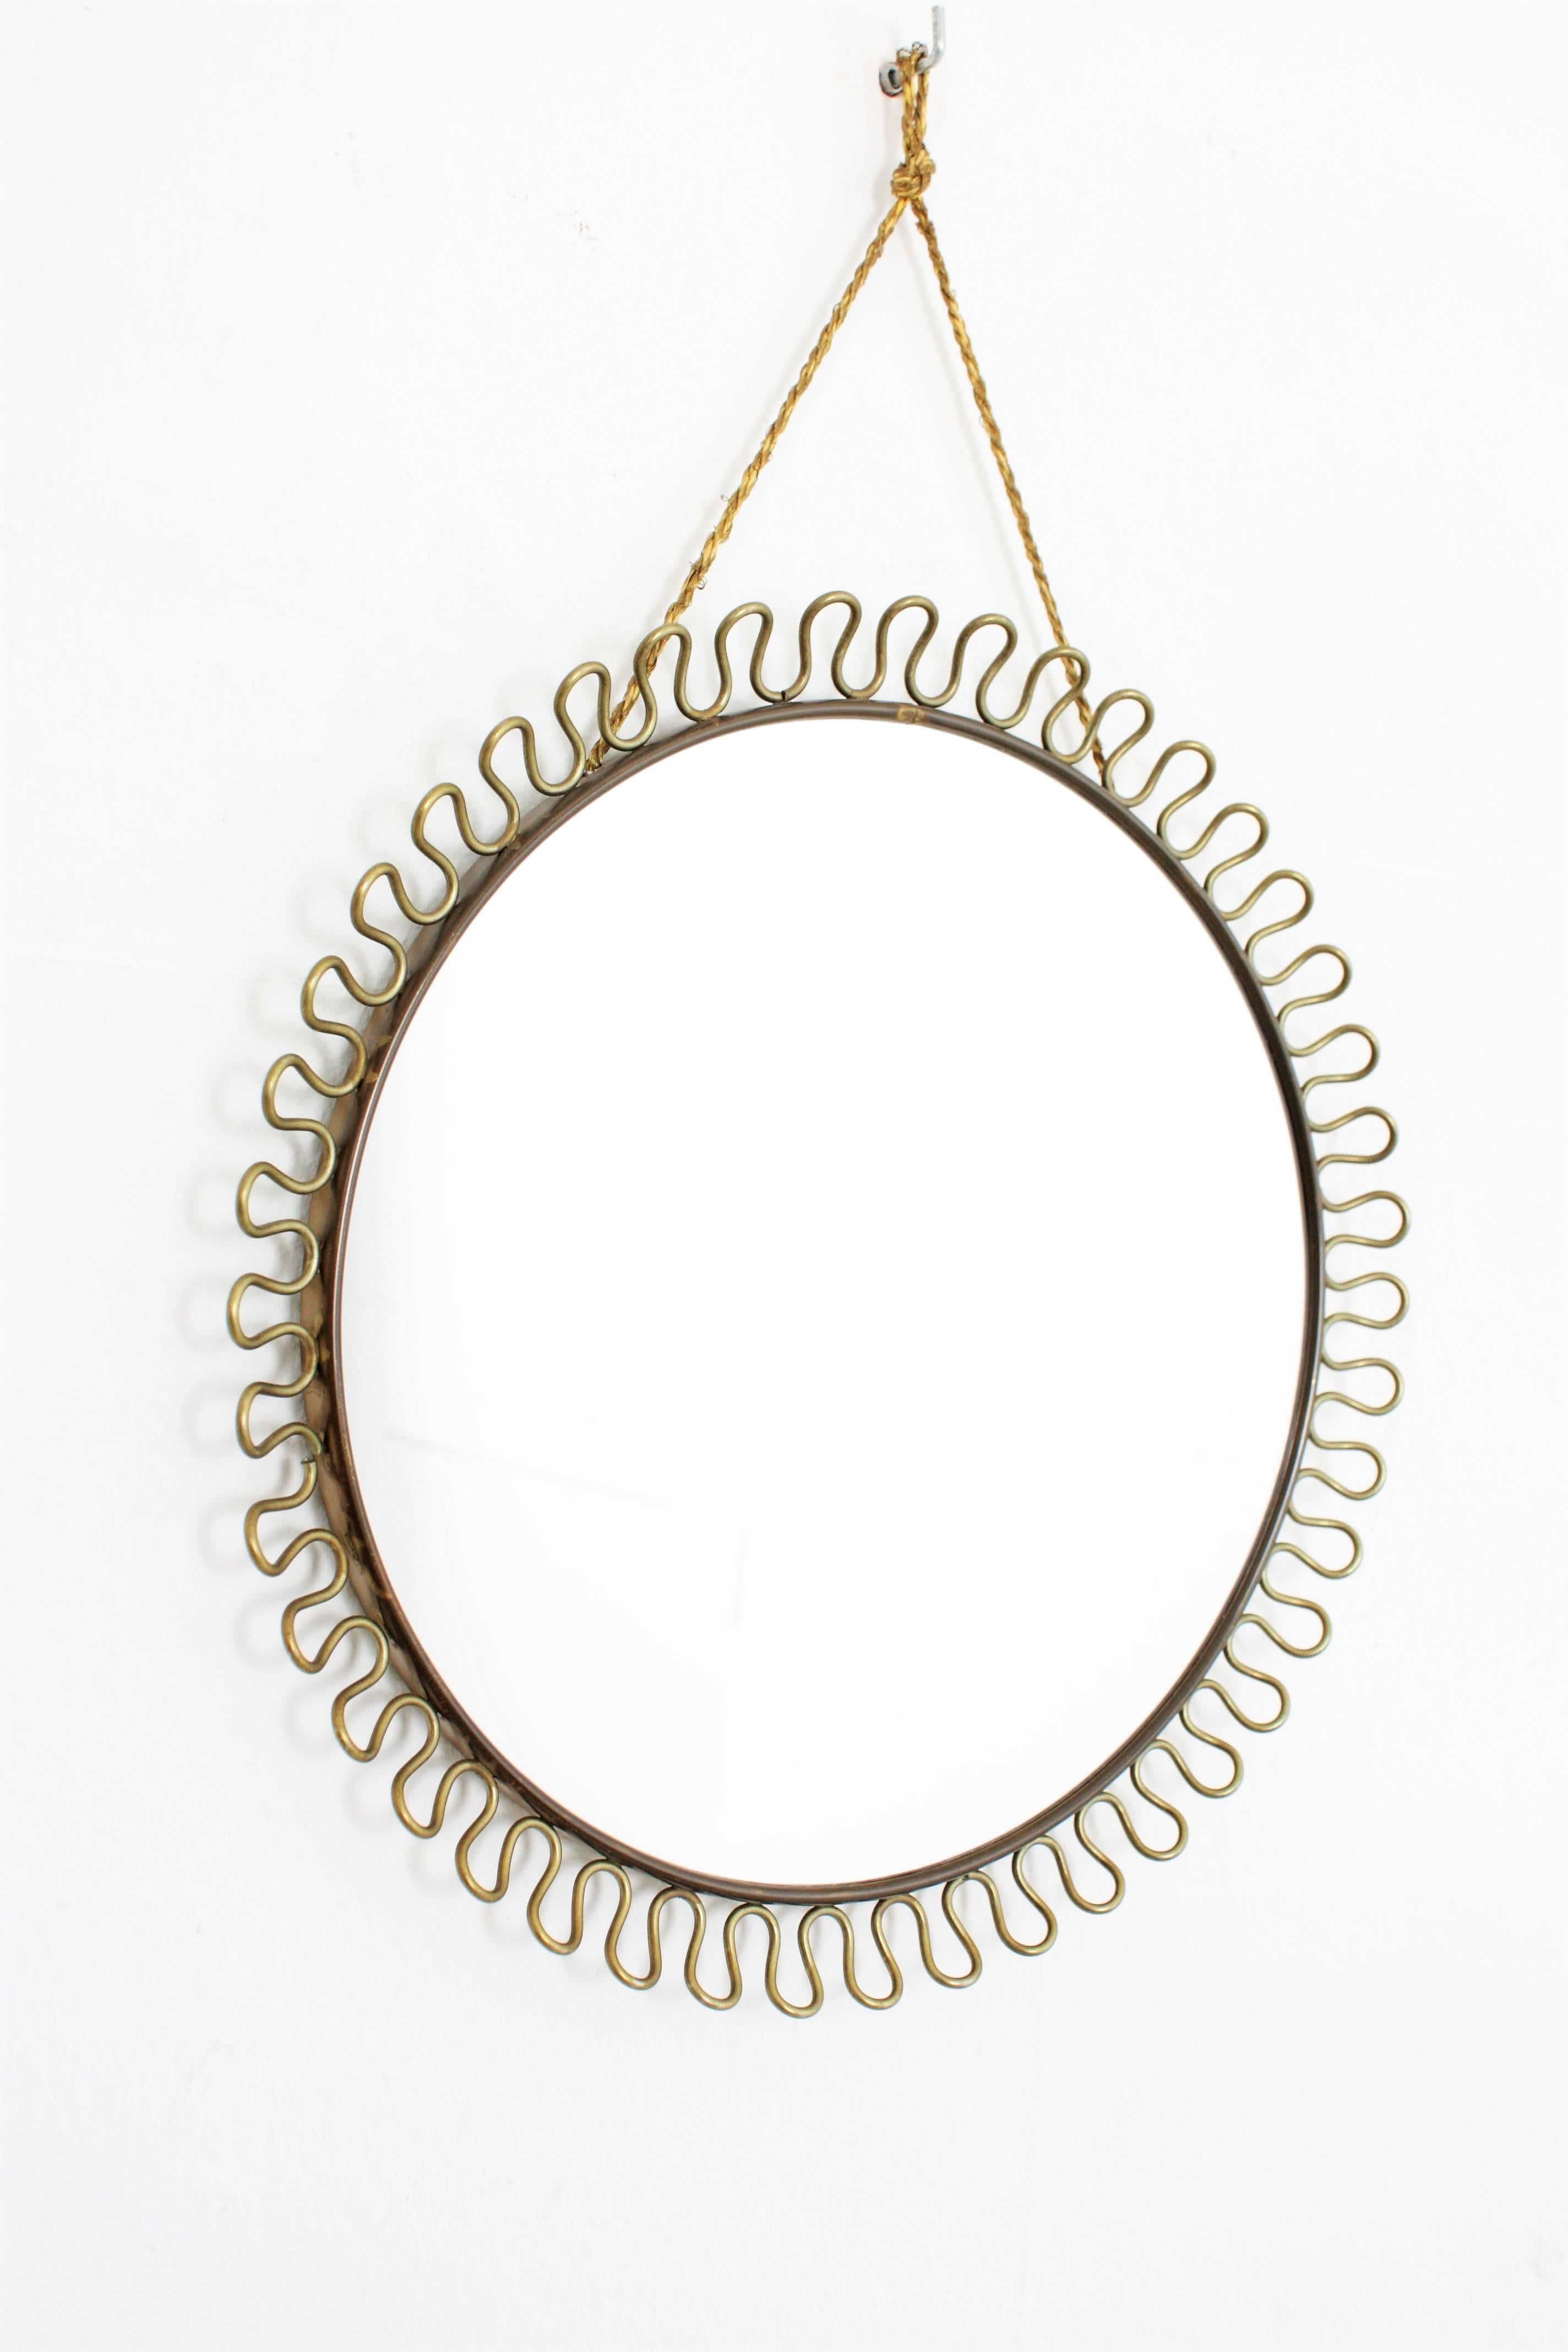 Beautiful small and delicate mirror with brass loop frame designed by Josef Frank for Svenskt Tenn.
J.Frank was born in Austria and is one of the most importart figures in Swedish Design
Josef Frank designed this mirror at the fifties and it was